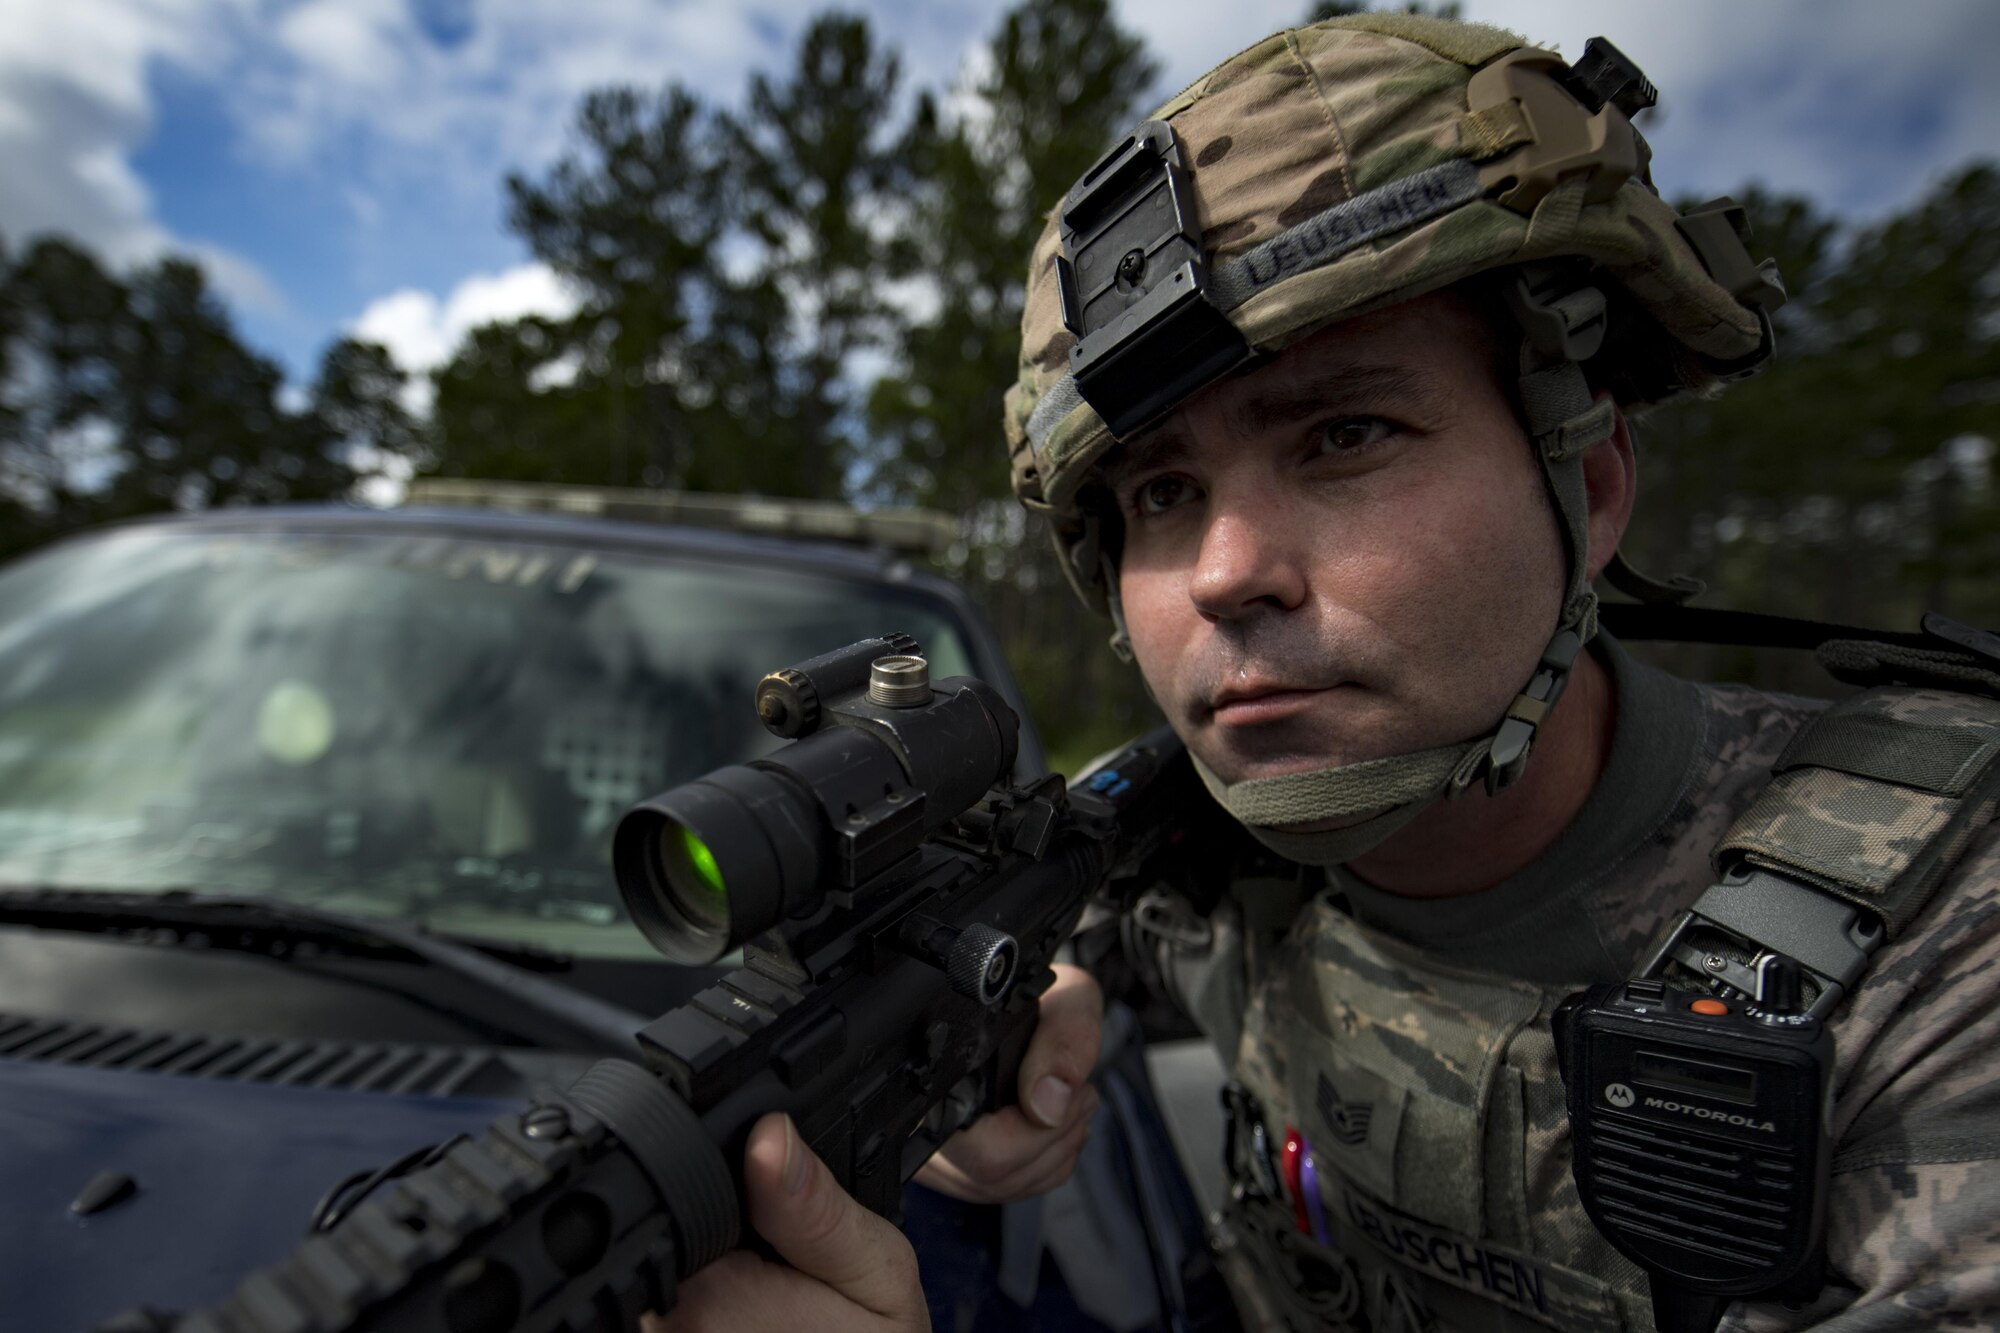 Tech. Sgt. Bert Leuschen, 23d Security Forces Squadron flight sergeant, secures the scene of an emergency response exercise, Aug. 22, 2017, at Moody Air Force Base, Ga. The purpose of this active-shooter exercise was to inspect the recovery phase of an emergency situation while maintaining realism as members still responded as normal. (U.S. Air Force photo by Airman 1st Class Daniel Snider)